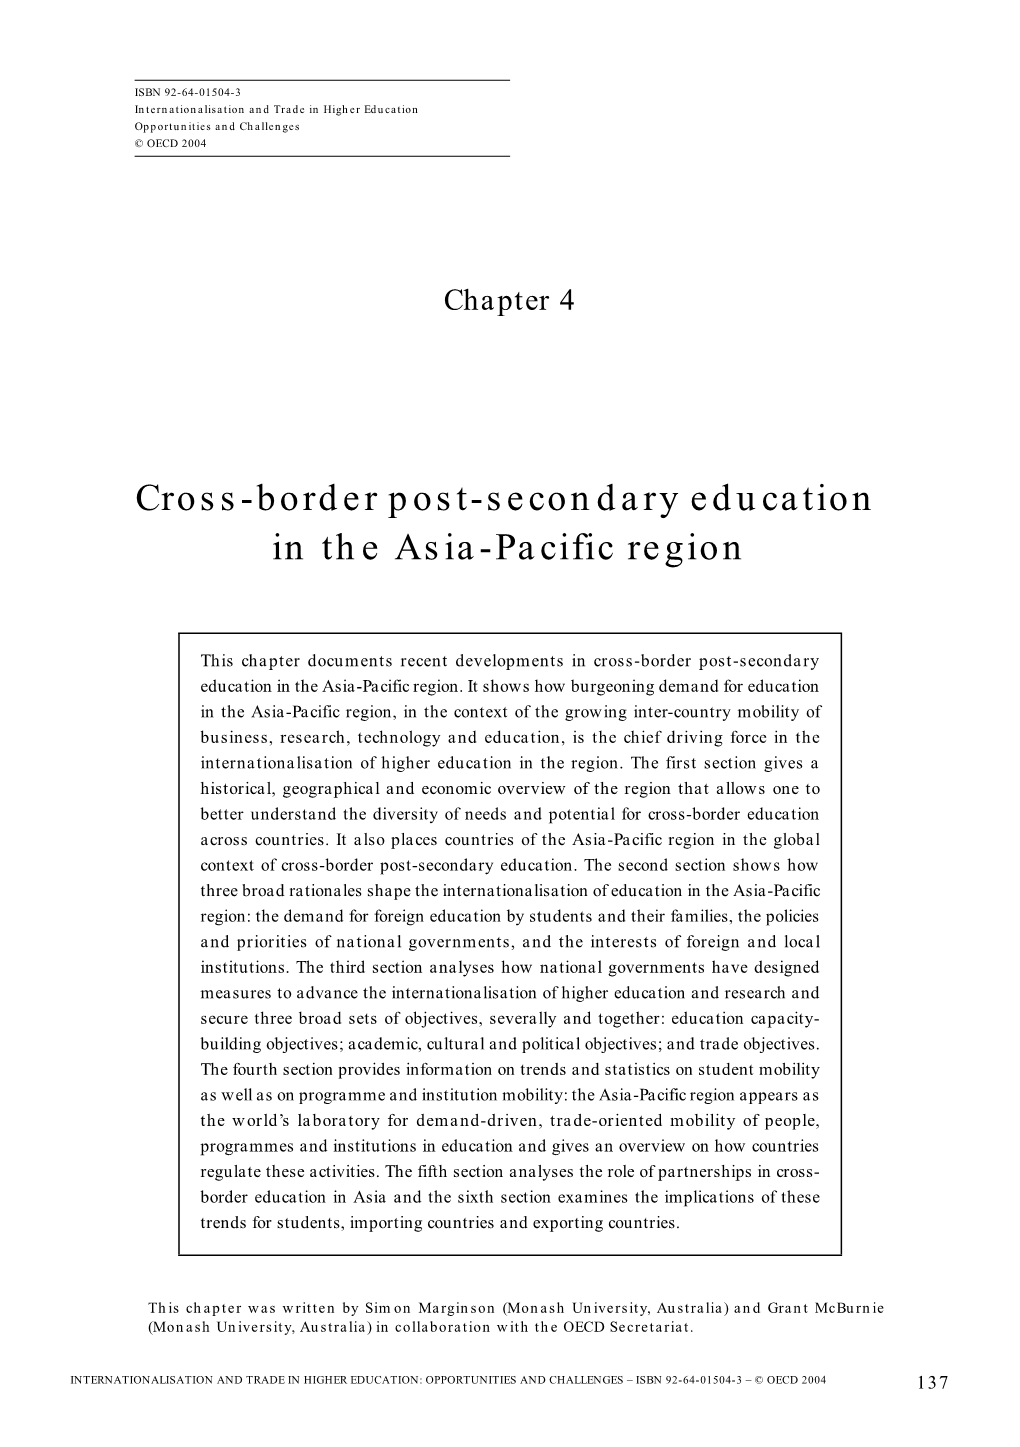 Cross-Border Post-Secondary Education in the Asia-Pacific Region